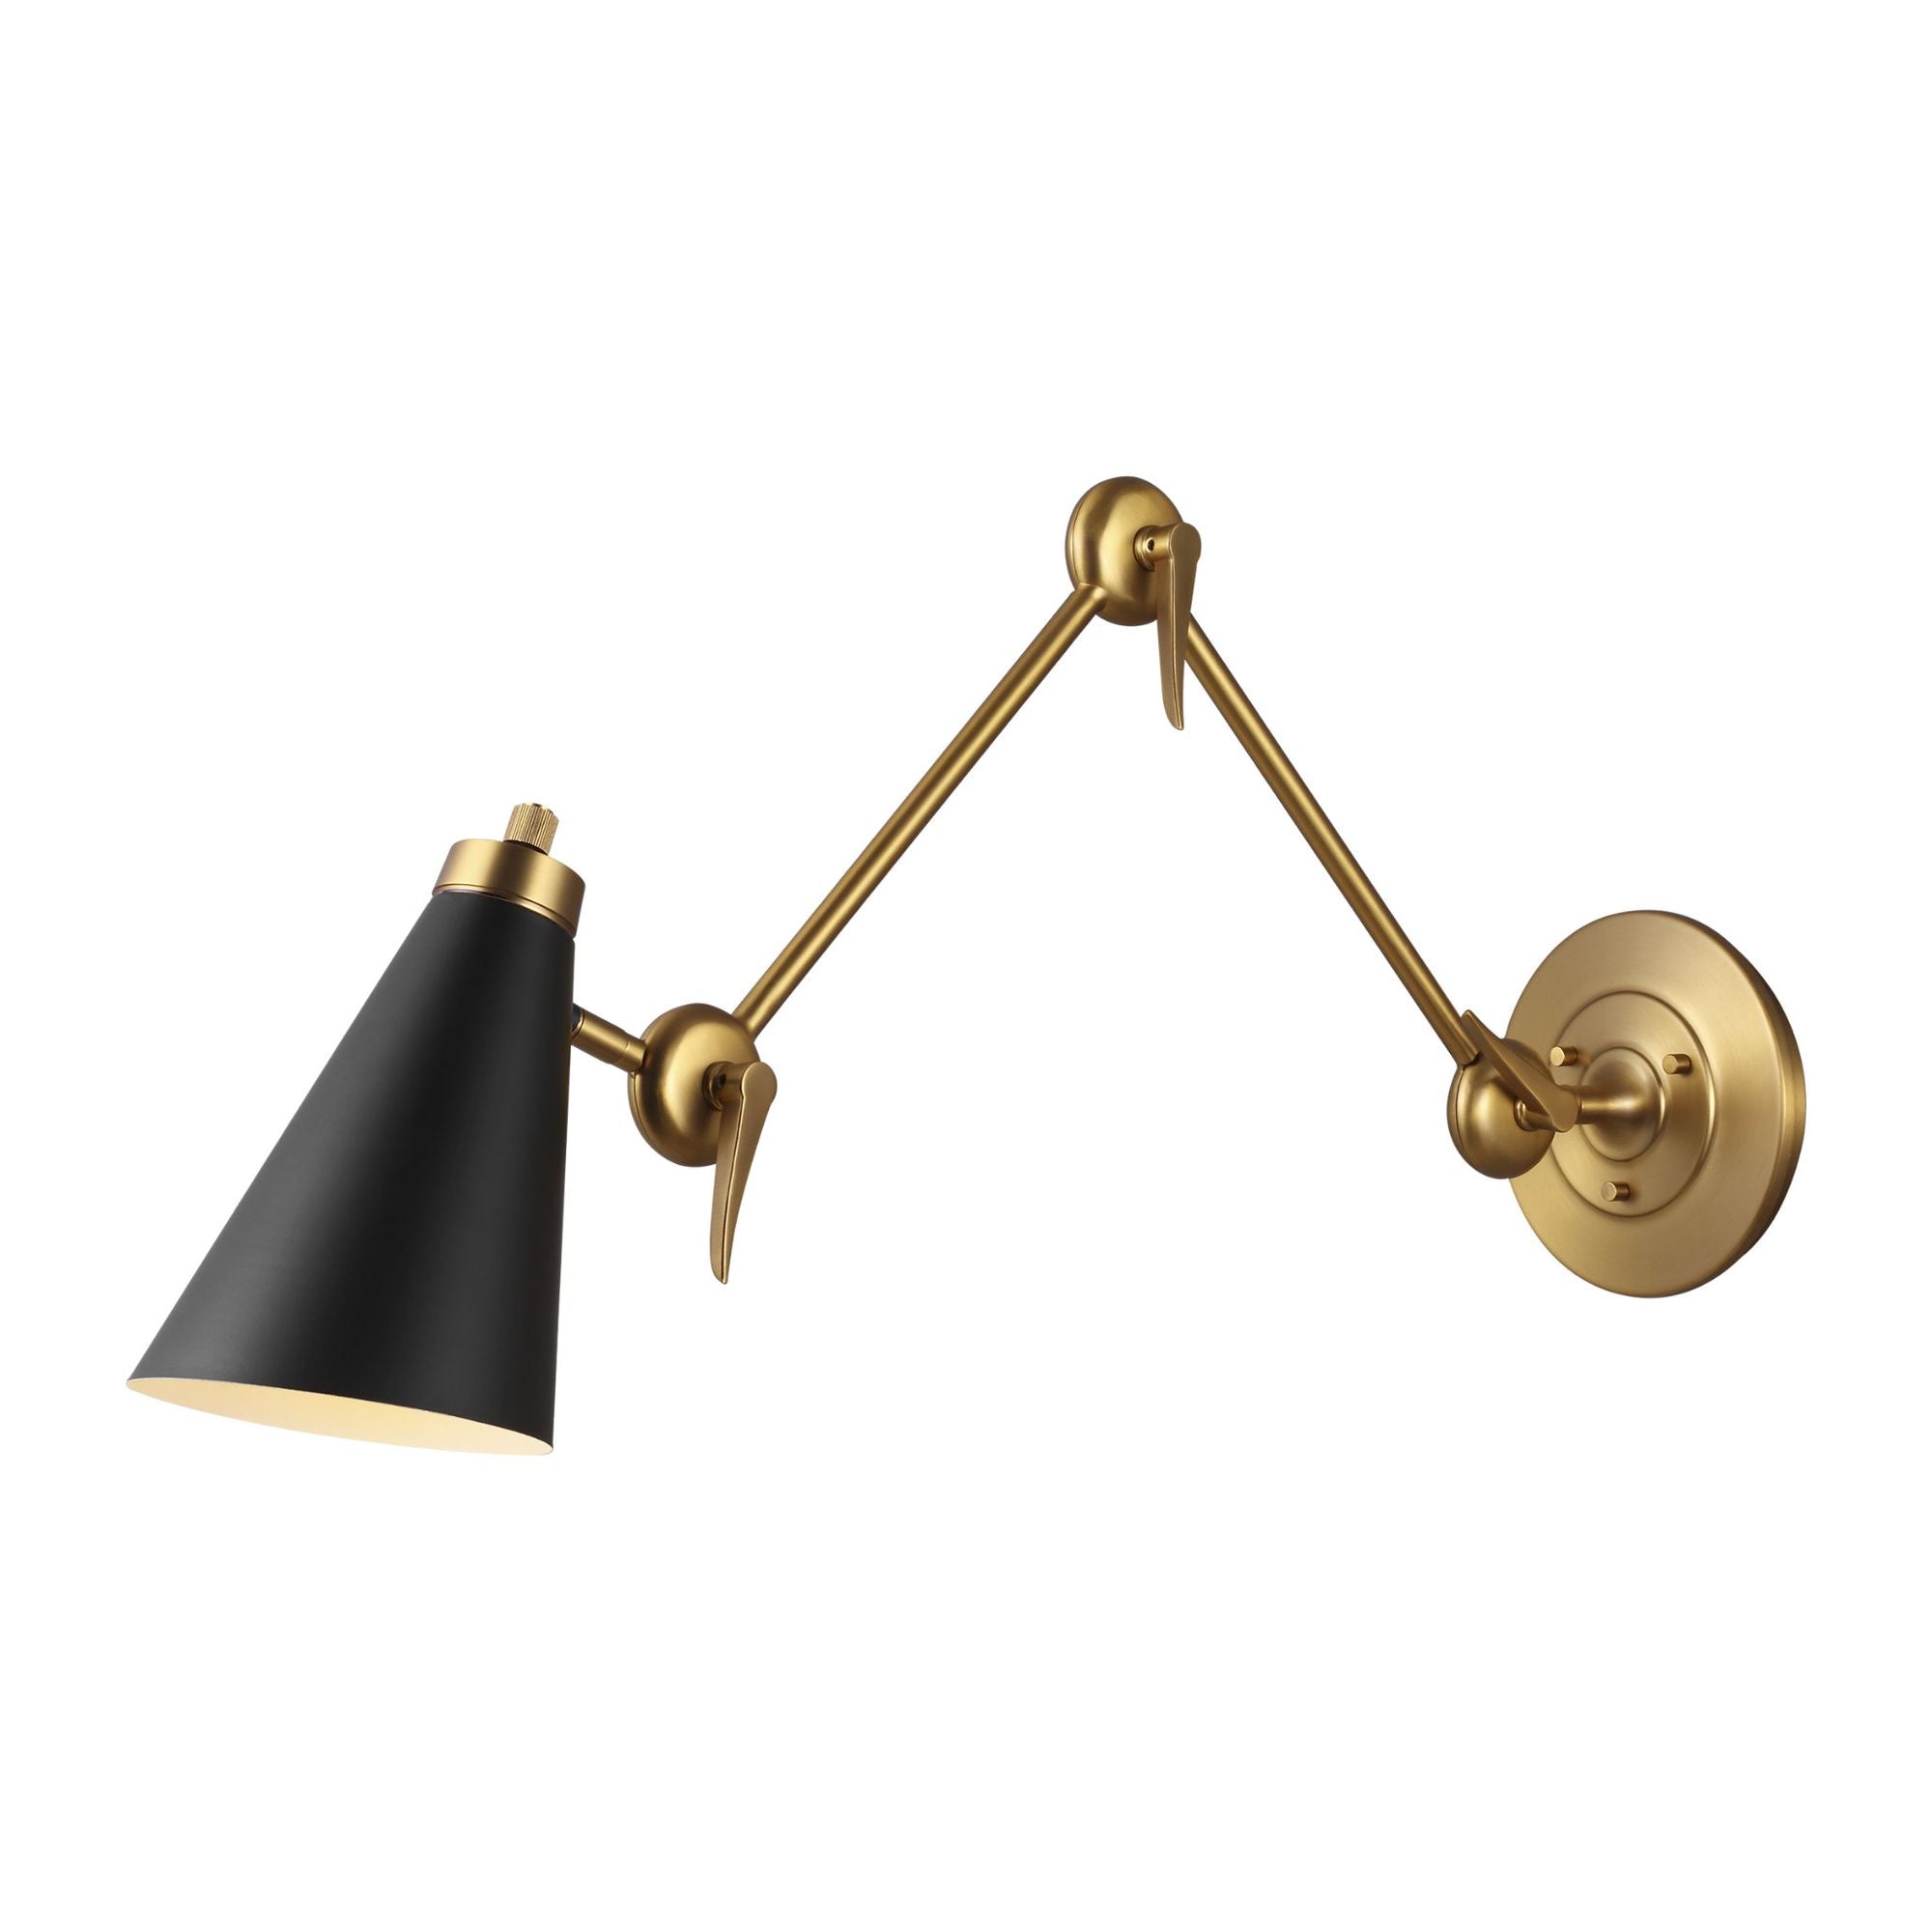 Thomas O'Brien Signoret 2 - Arm Library Sconce in Burnished Brass